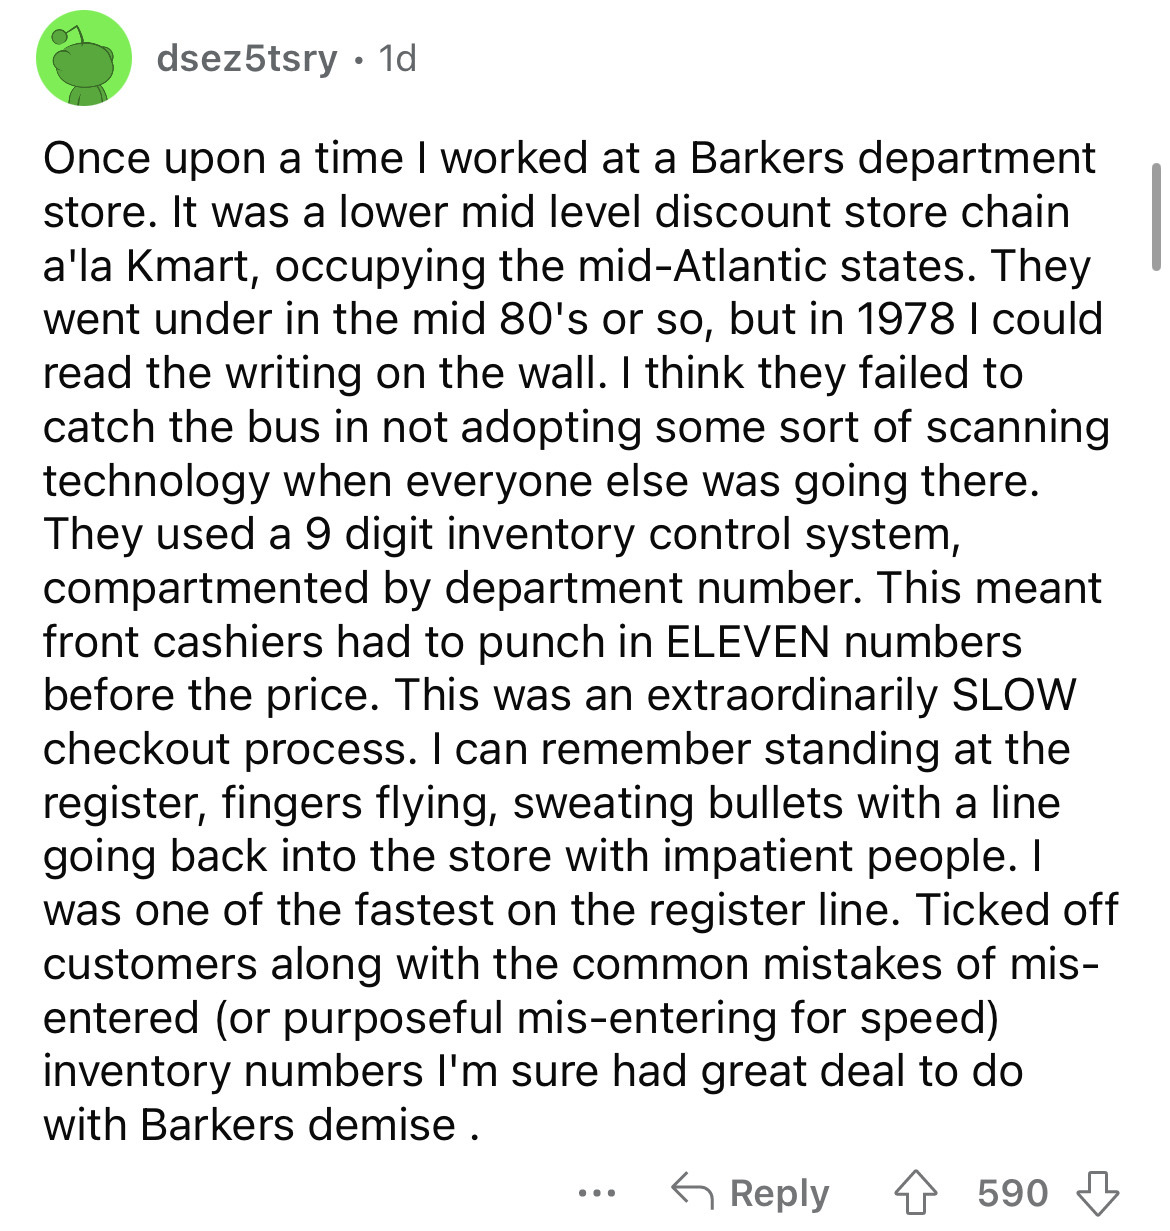 document - dsez5tsry 1d Once upon a time I worked at a Barkers department store. It was a lower mid level discount store chain a'la Kmart, occupying the midAtlantic states. They went under in the mid 80's or so, but in 1978 I could read the writing on the